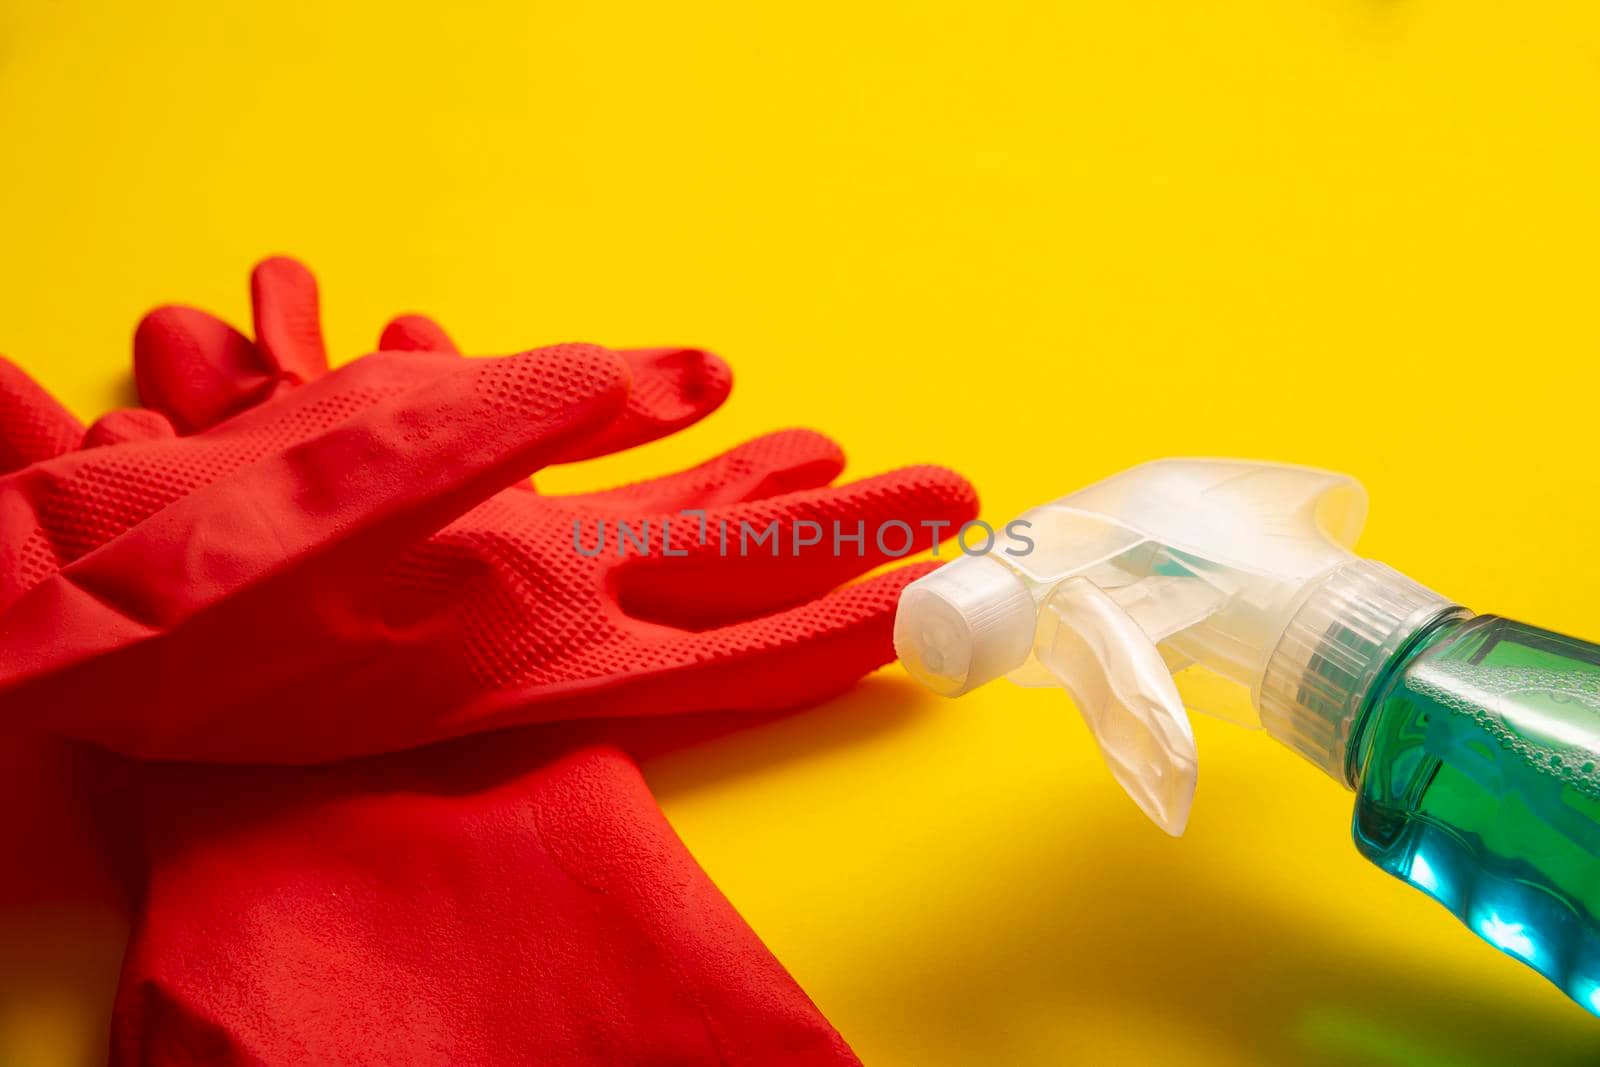 red rubber gloves and liquid detergent in sparay bottle on yellow background, cleaning and sanitization concept